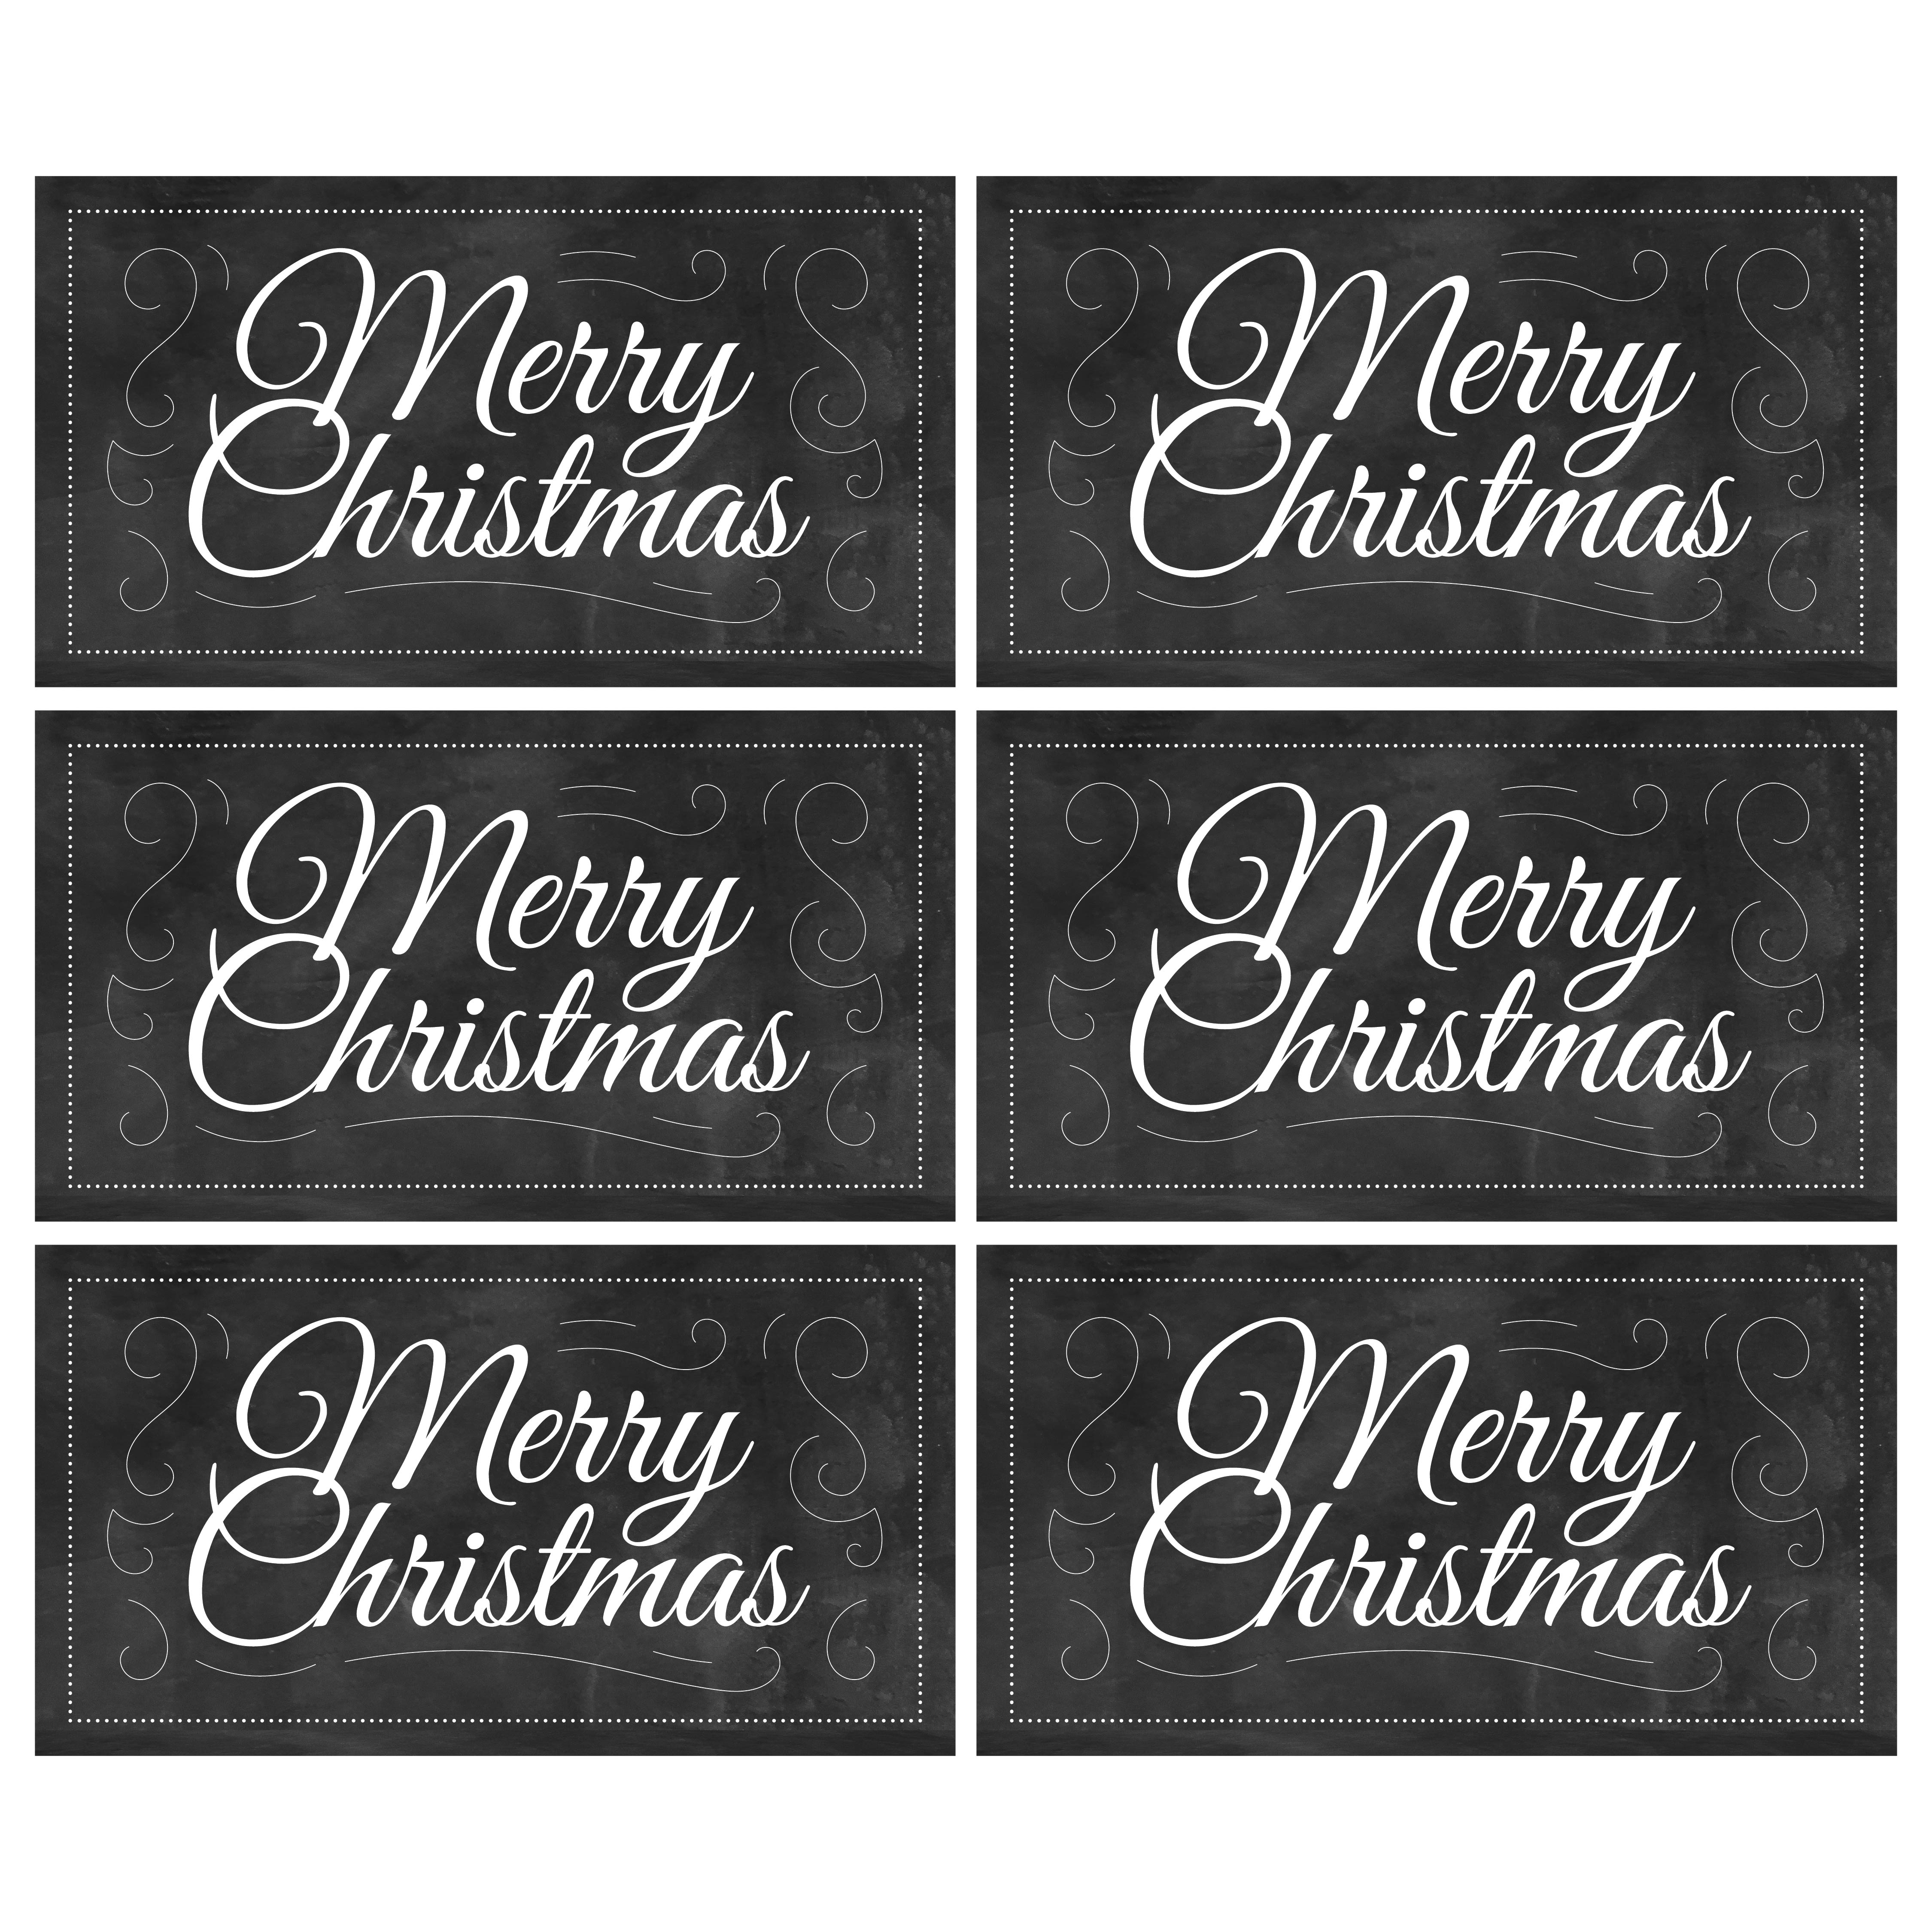 6 Best Images of Free Printable Christmas Gift Tags Black And White